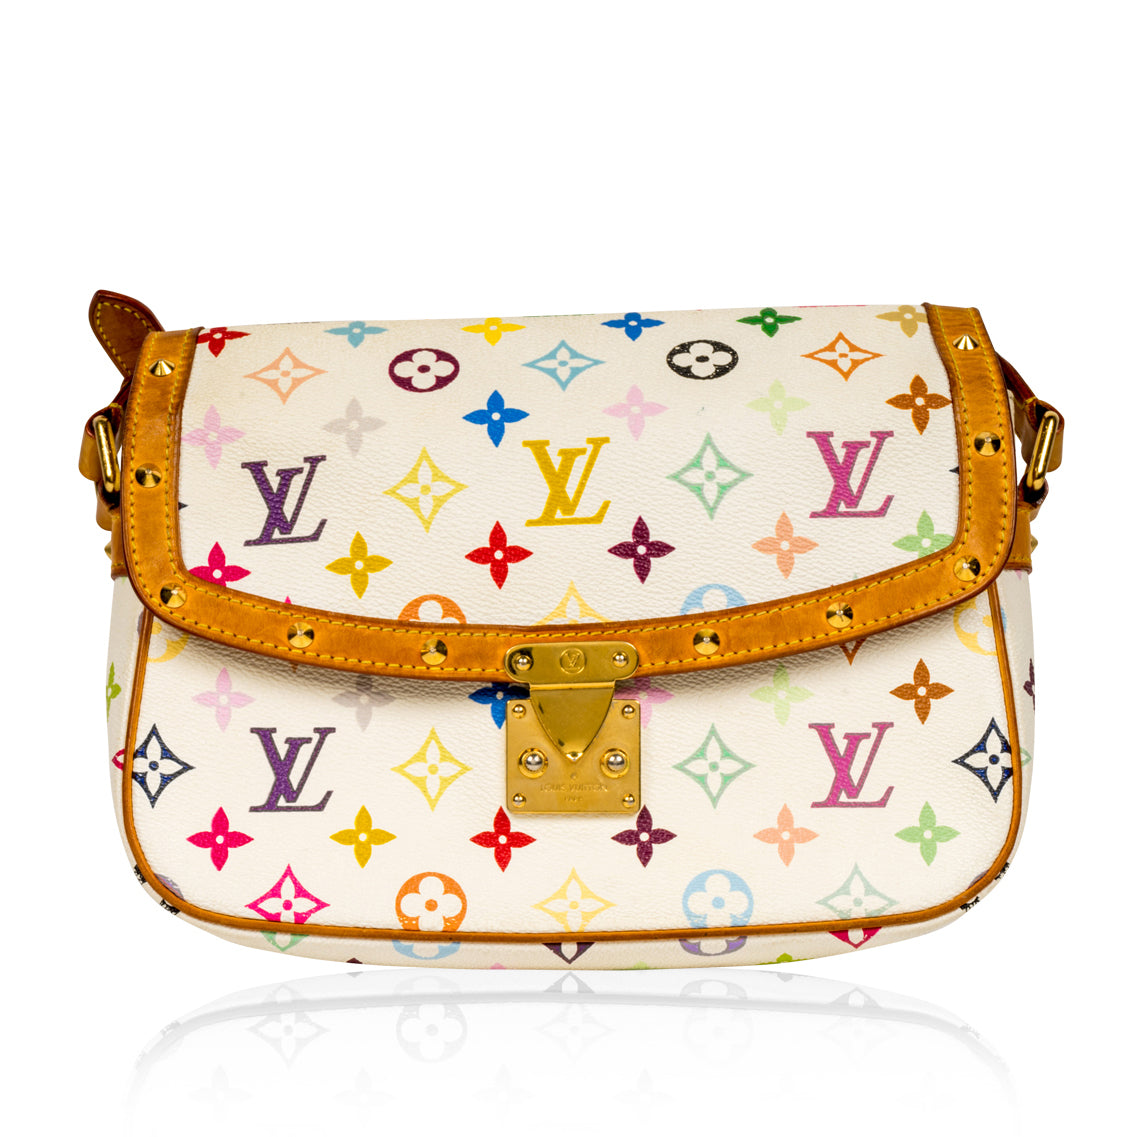 Louis Vuitton Sologne. Pt 2 for SOMEDAY SHABBY 